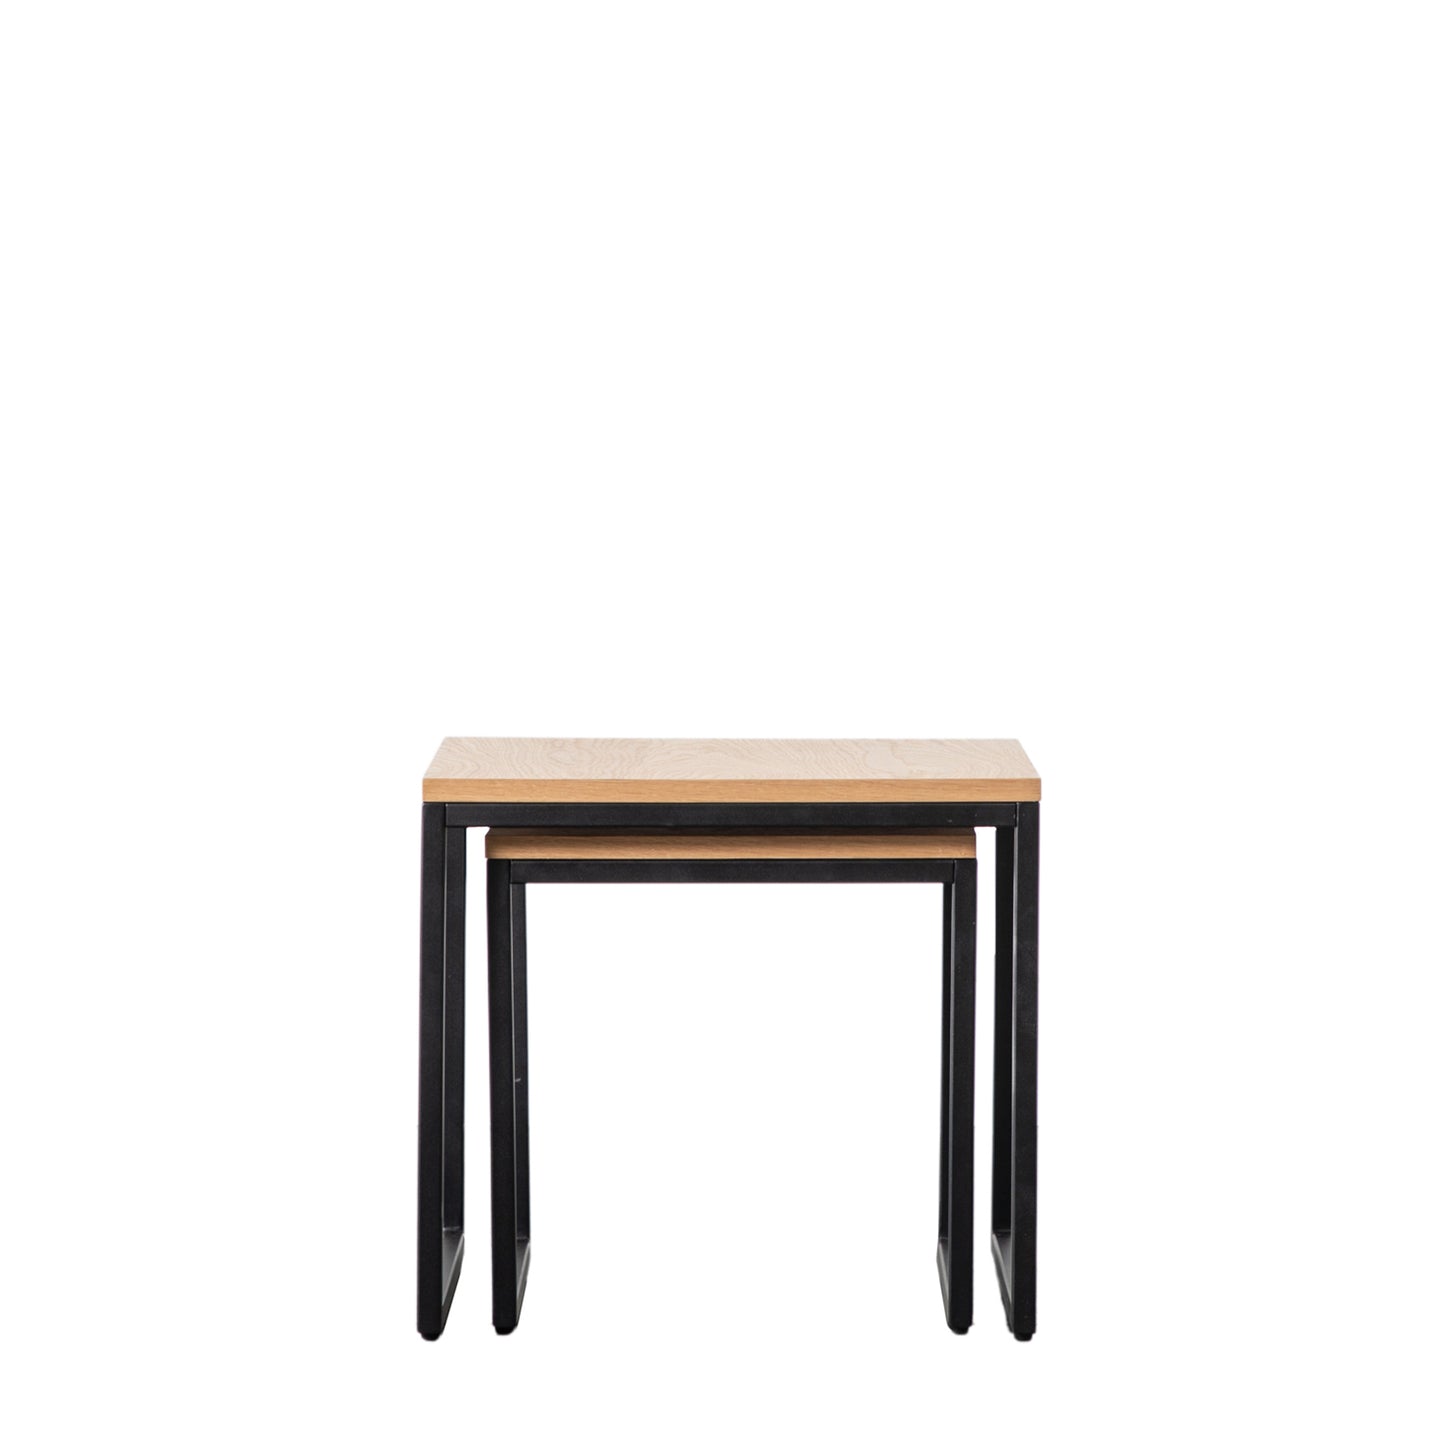 Load image into Gallery viewer, Interior decor, Home furniture: Two Staverton Side Tables for interior decor and home furniture on a white background from Kikiathome.co.uk.
